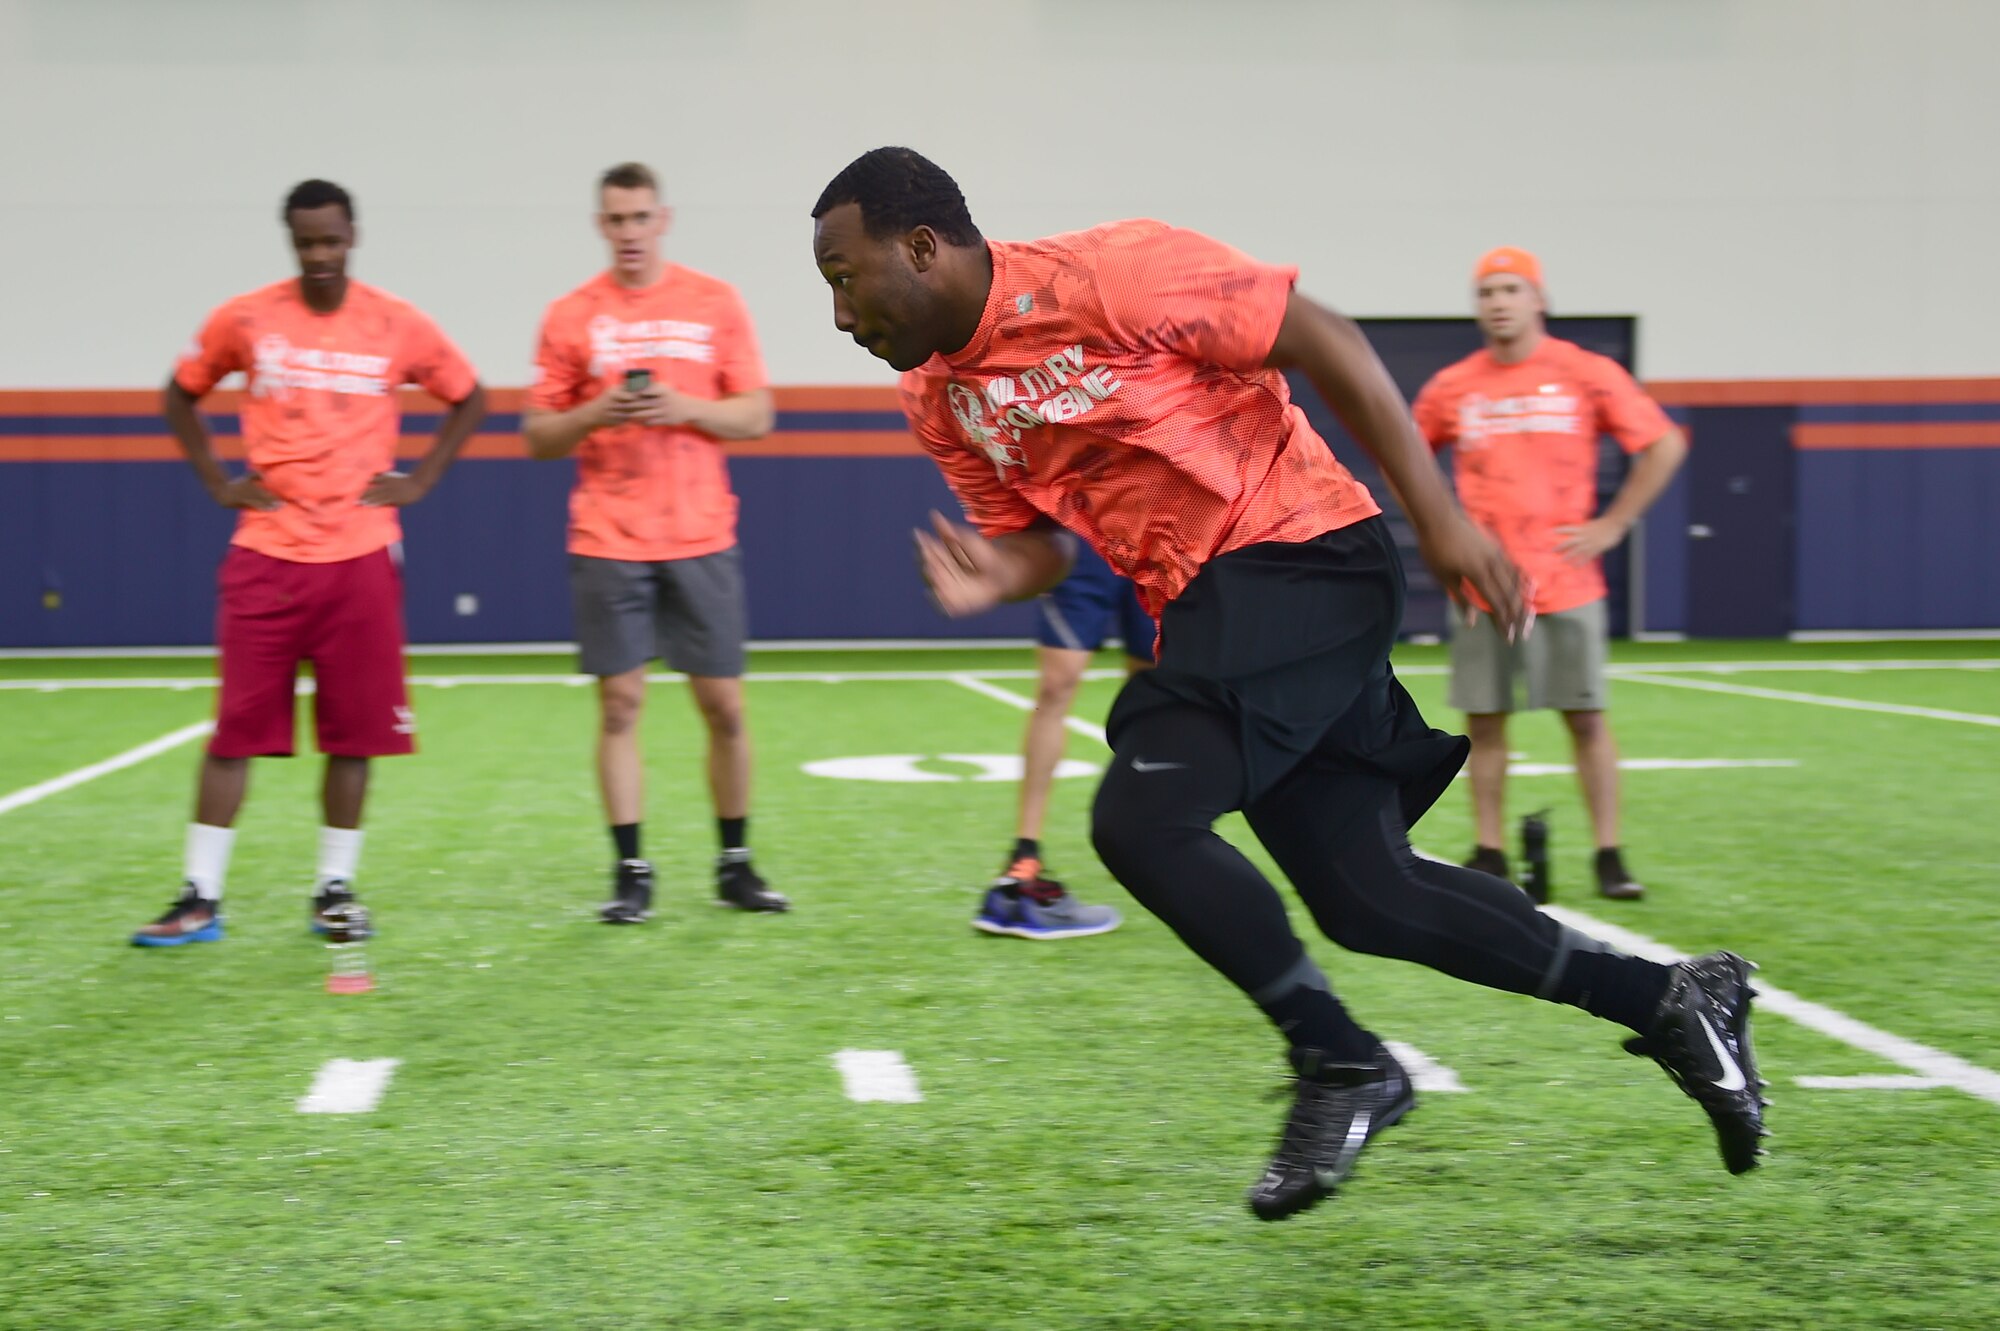 Senior Airman James Lampley, 460th Force Support Squadron career development technician, accelerates at the start of the shuttle drill portion on the military combine hosted by the Denver Broncos and United Services Automotive Association Aug. 7, 2015, at Denver Broncos Headquarters Facility at Dove Valley in Denver. The combine consisted of drills similar to the ones prospective National Football League players are expected to complete during the NFL combine held in Indianapolis before the NFL draft. All participants were also treated to a viewing of the Broncos’ Friday morning practice and a visit from Broncos players, as well as the head coach. (U.S. Air Force photo by Airman 1st Class Luke W. Nowakowski/Released)